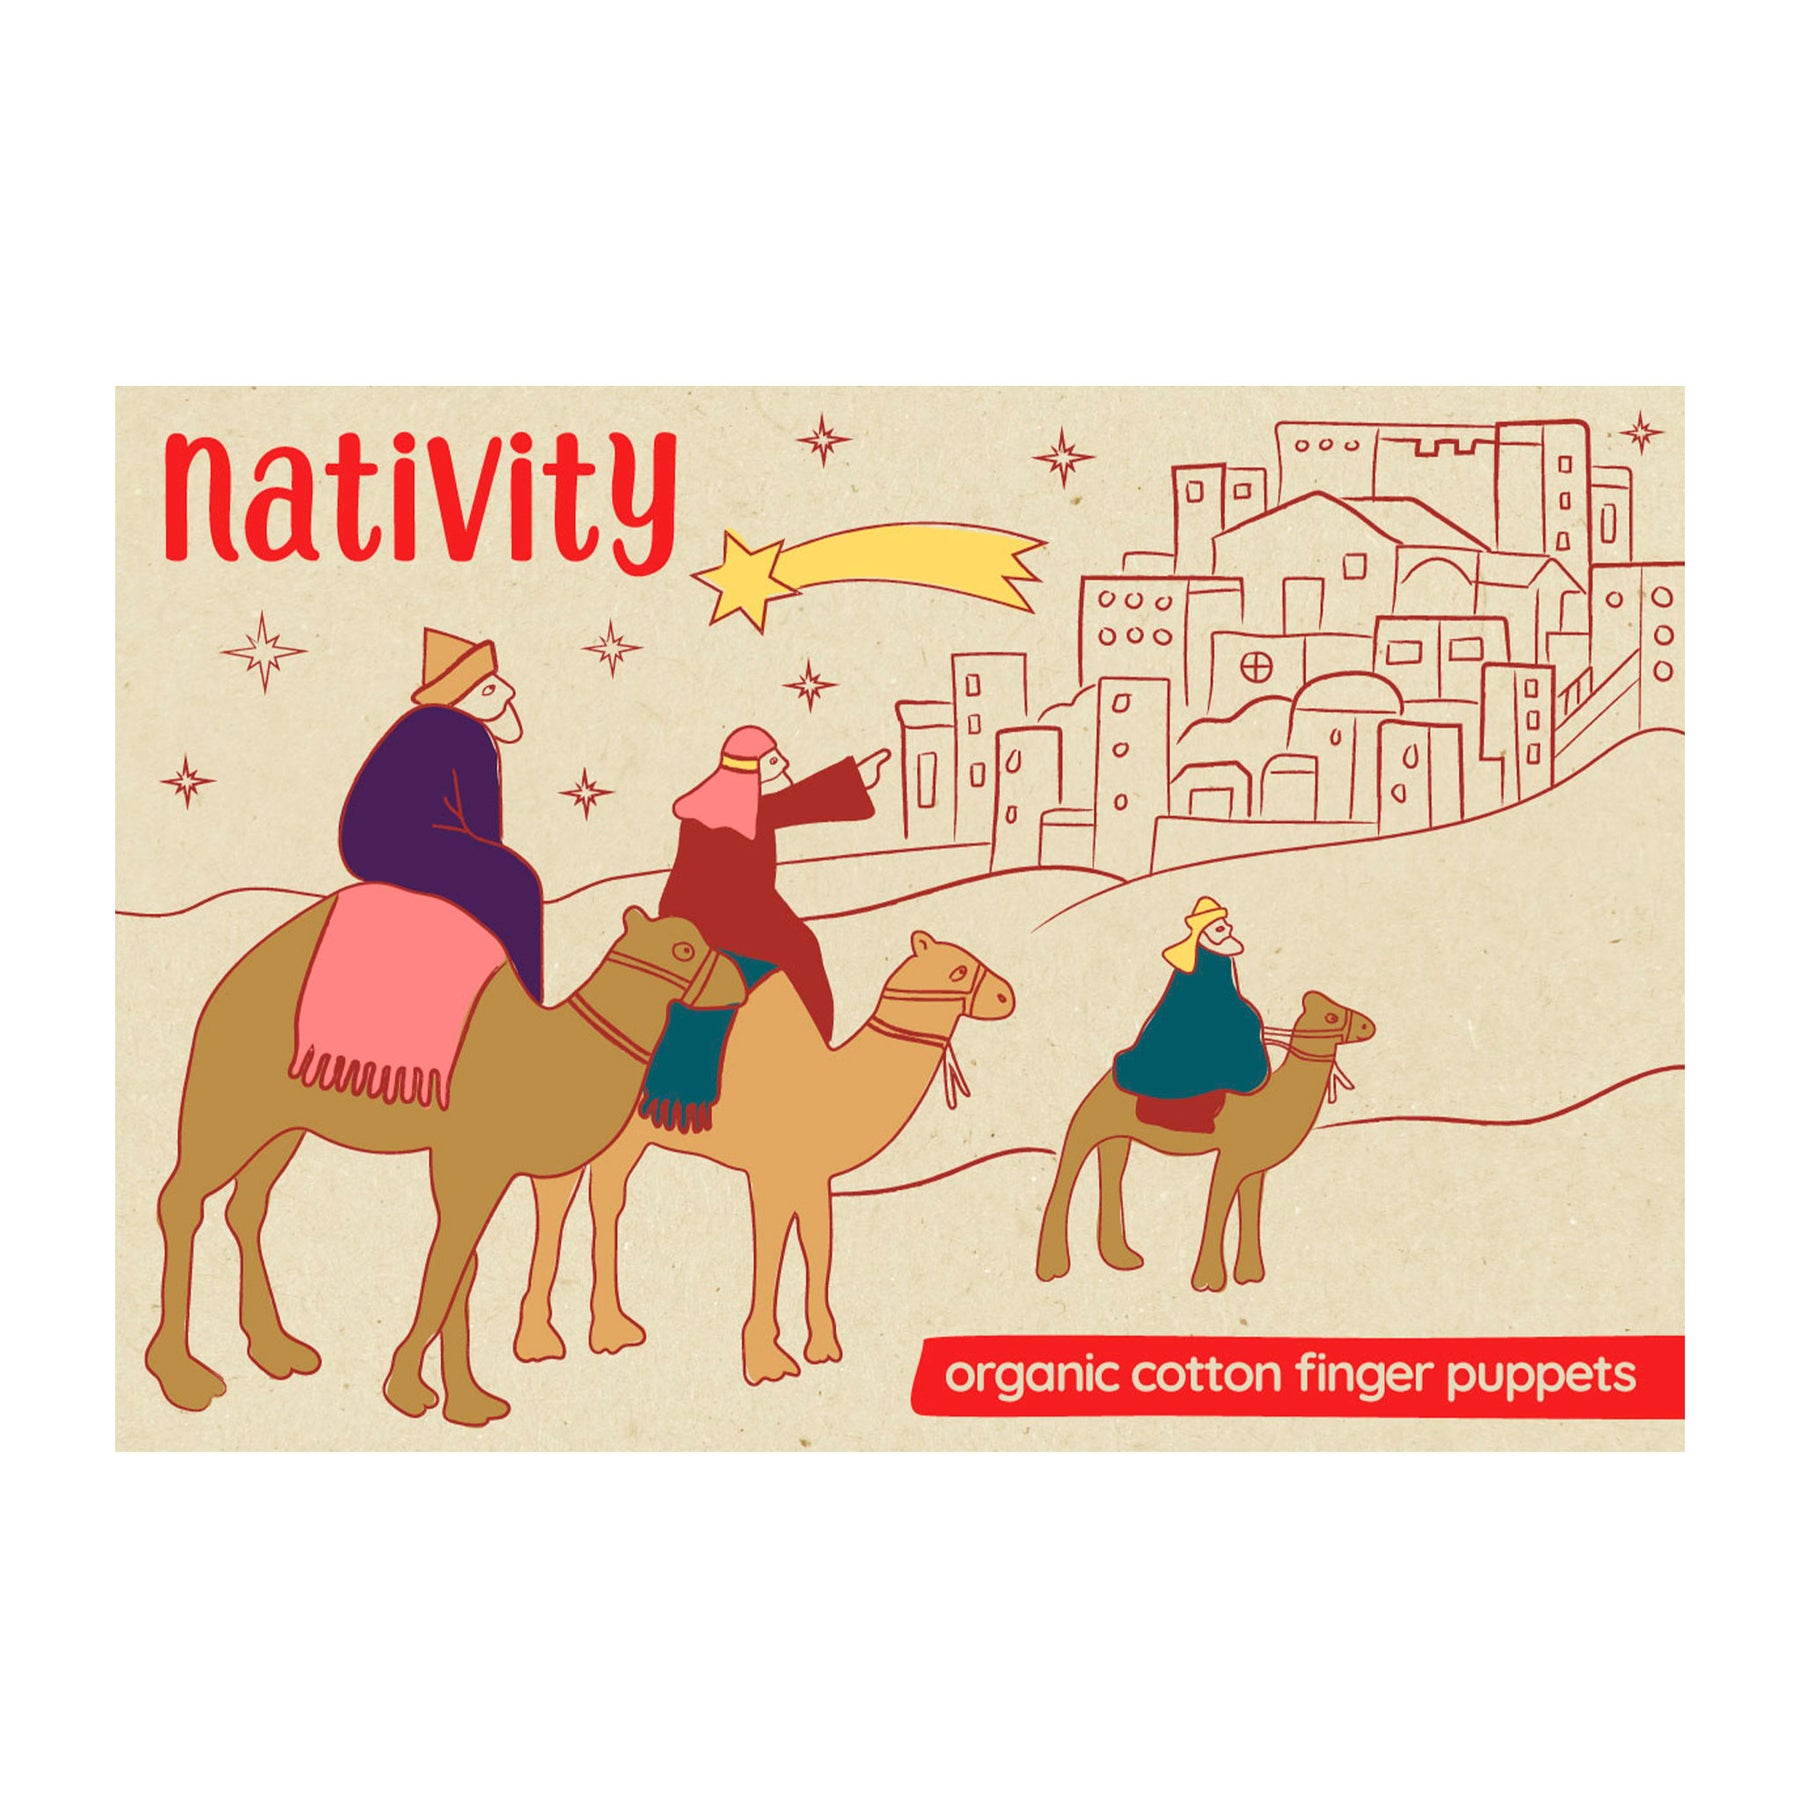 Nativity Story Pack of 4 - Organic Cotton Finger Puppets